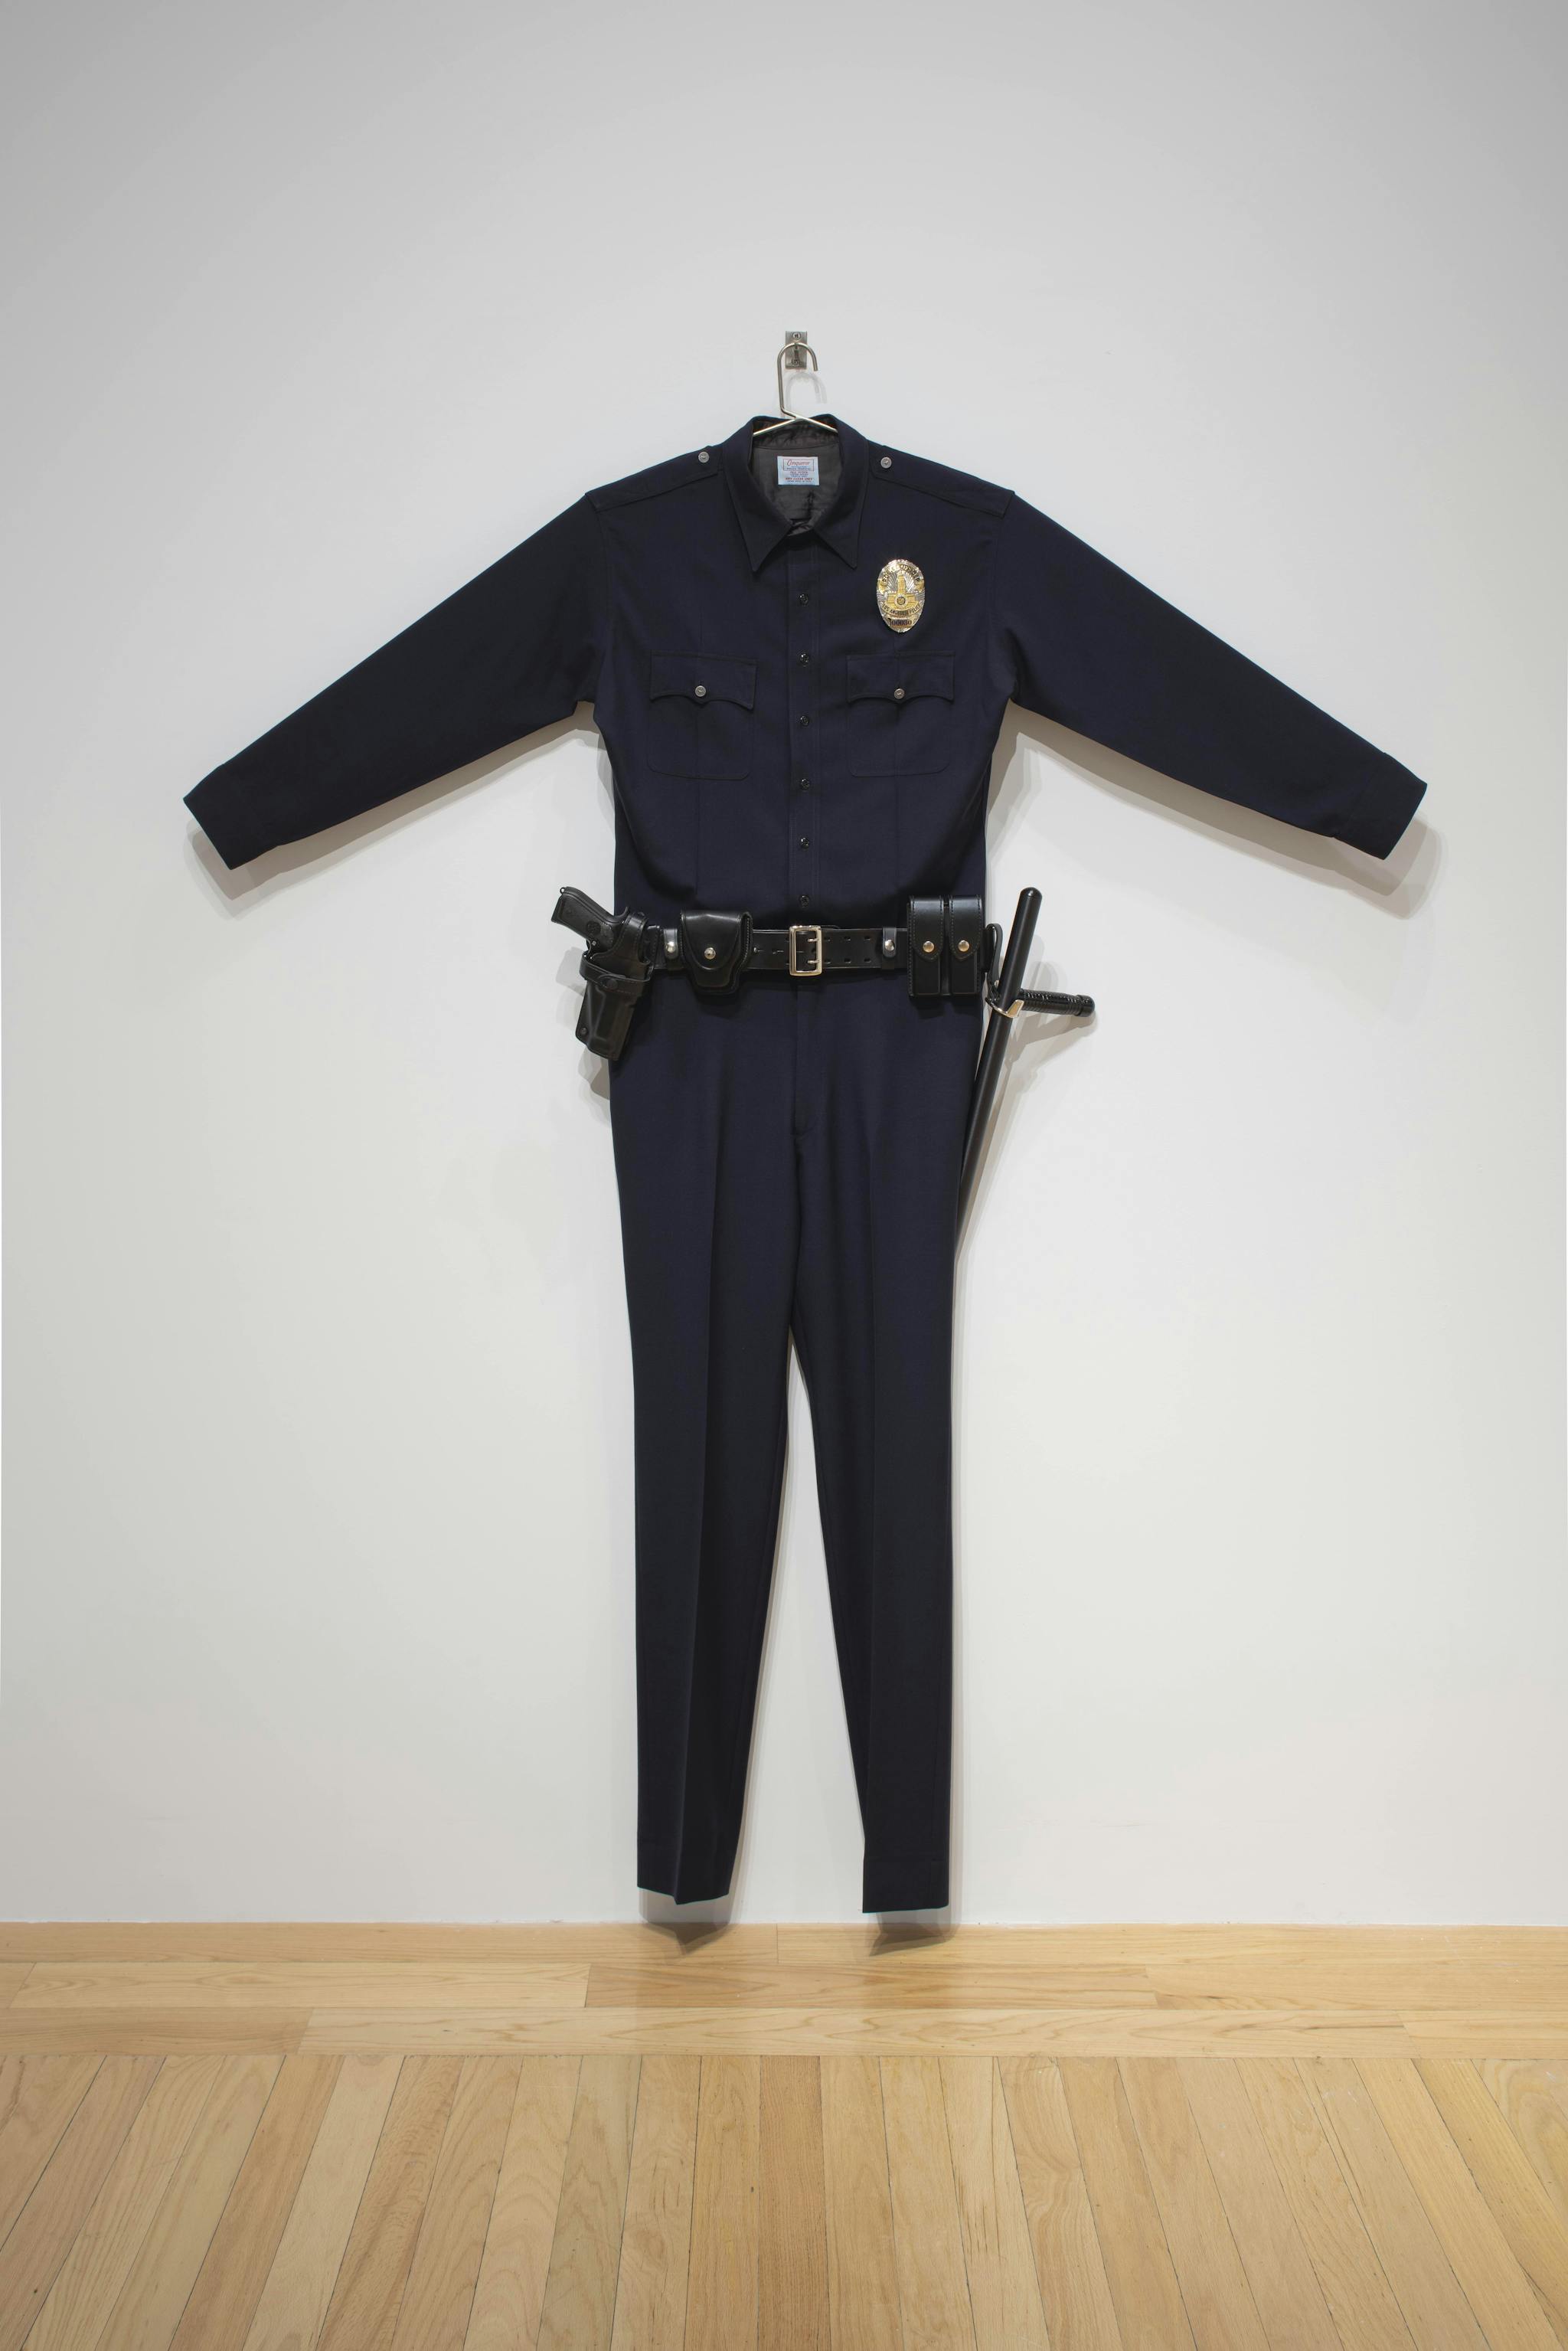 A navy blue police uniform by Chris Burden is on display.